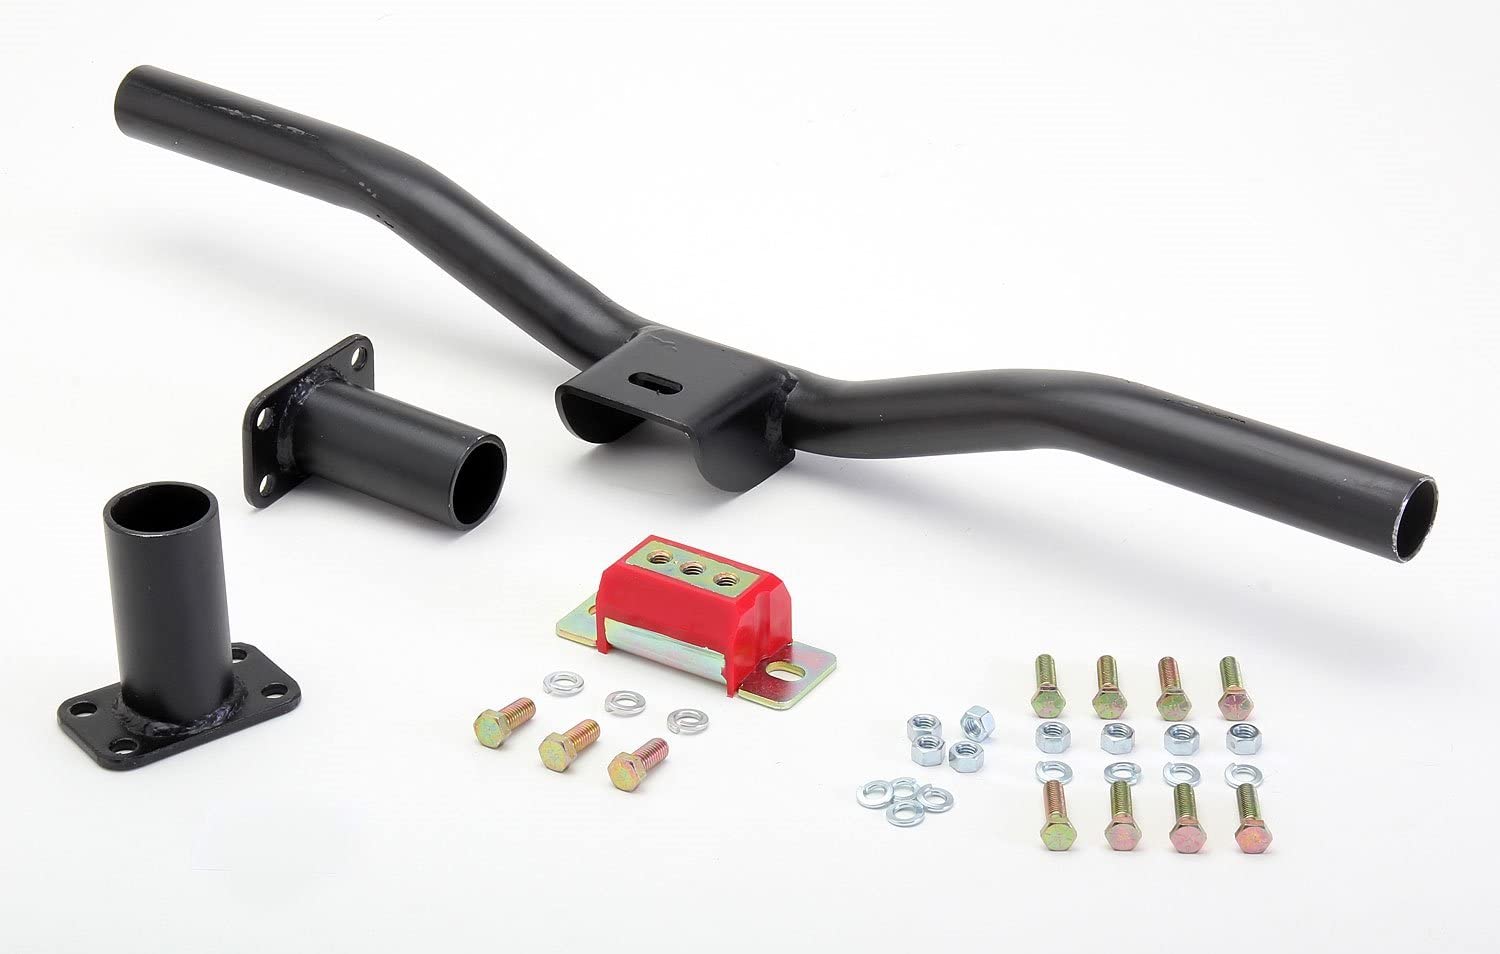 Trans-Dapt Performance 6549 Transmission Crossmember Kit Universal Supports 700R4/4L60E/T56 Trans. Fits 26-36 in. Framerail Width 3 in. Drop Distance Polyurethane Pads Transmission Crossmember Kit